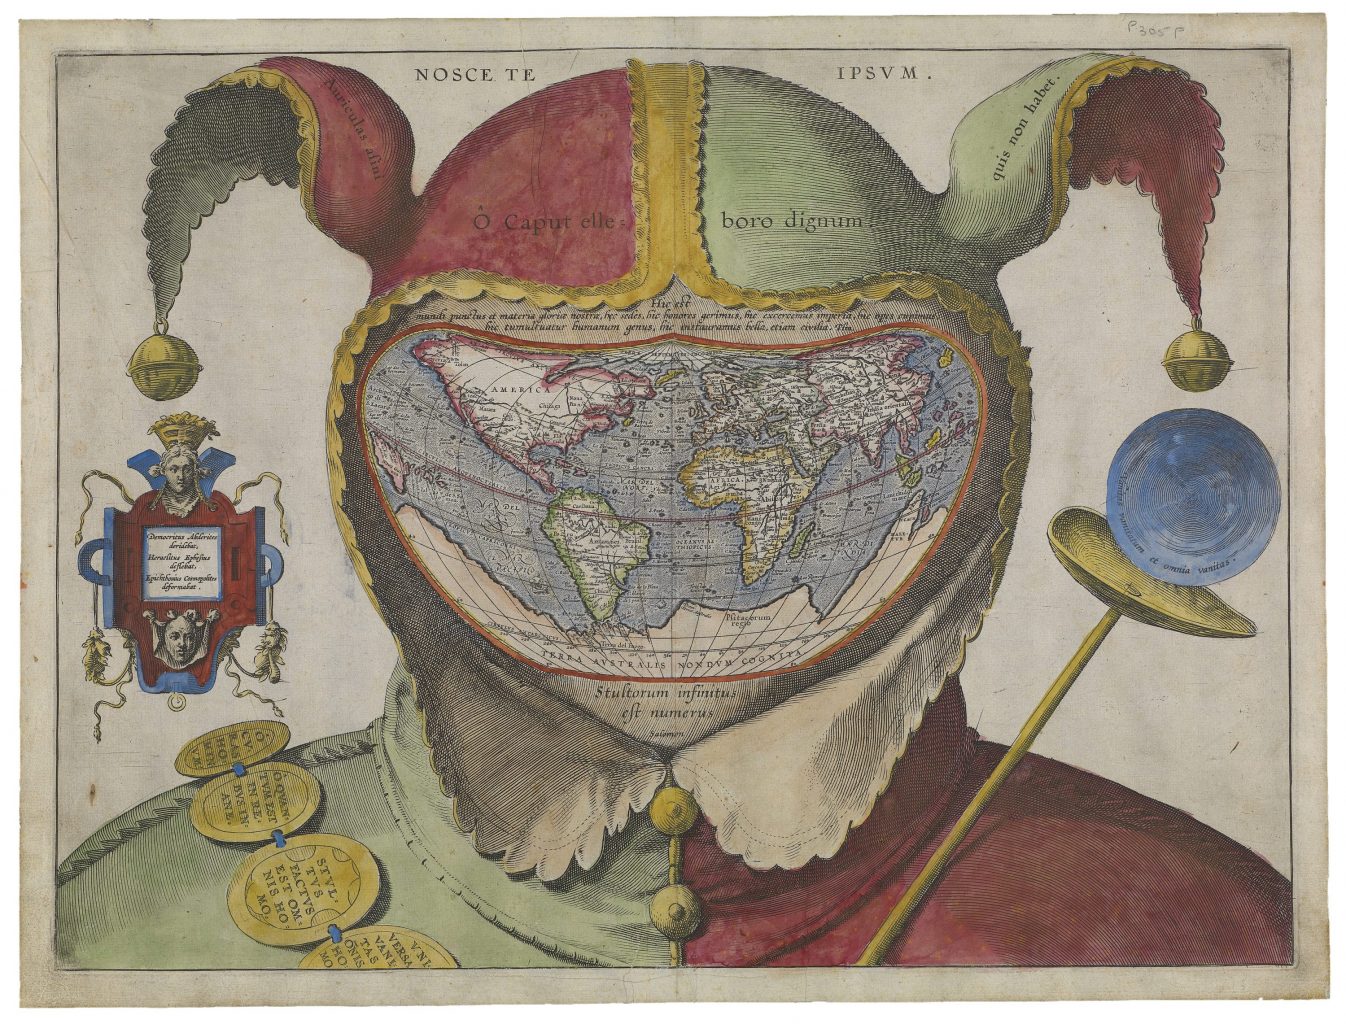 A world map set within the cap of a fool, or jester,